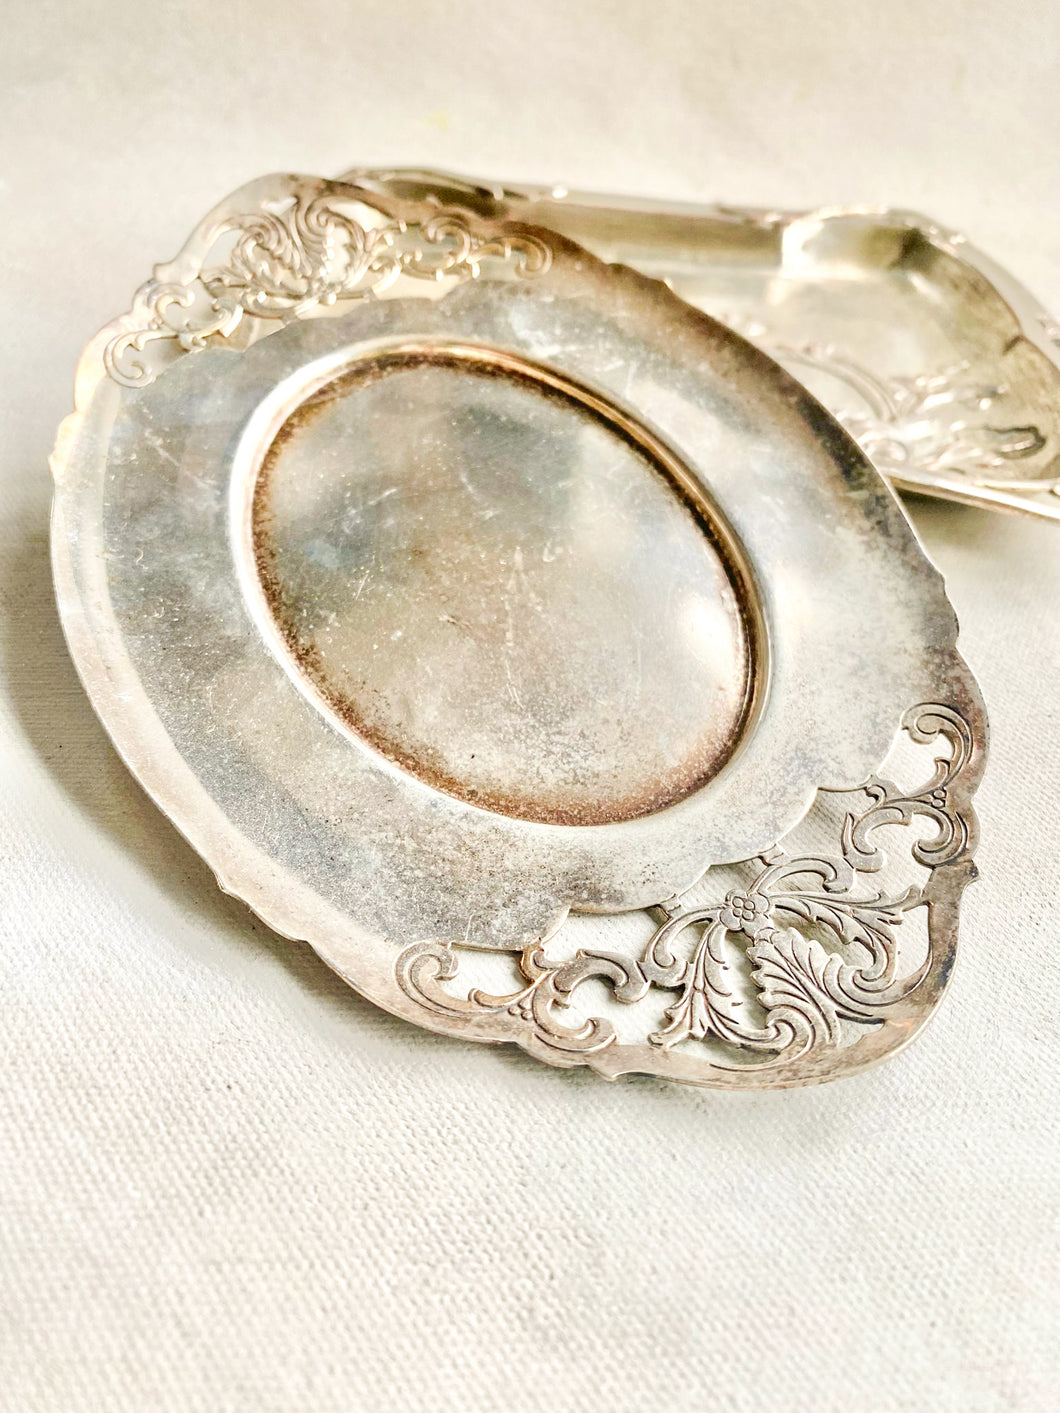 Small Silver Plate Tray